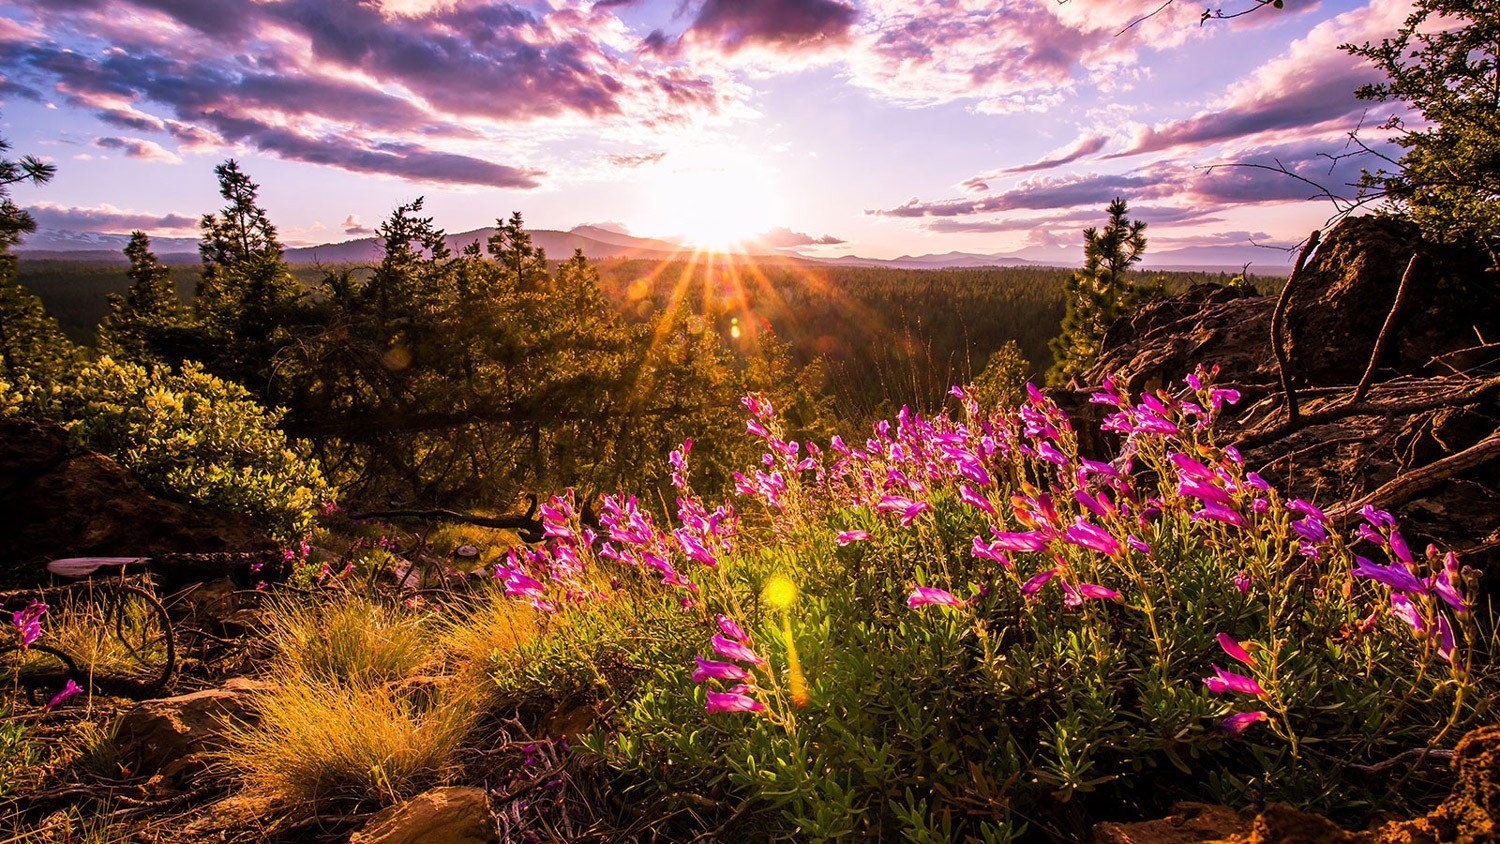 Wildflowers in bloom in Bend, Oregon's natural landscape at sunset. 